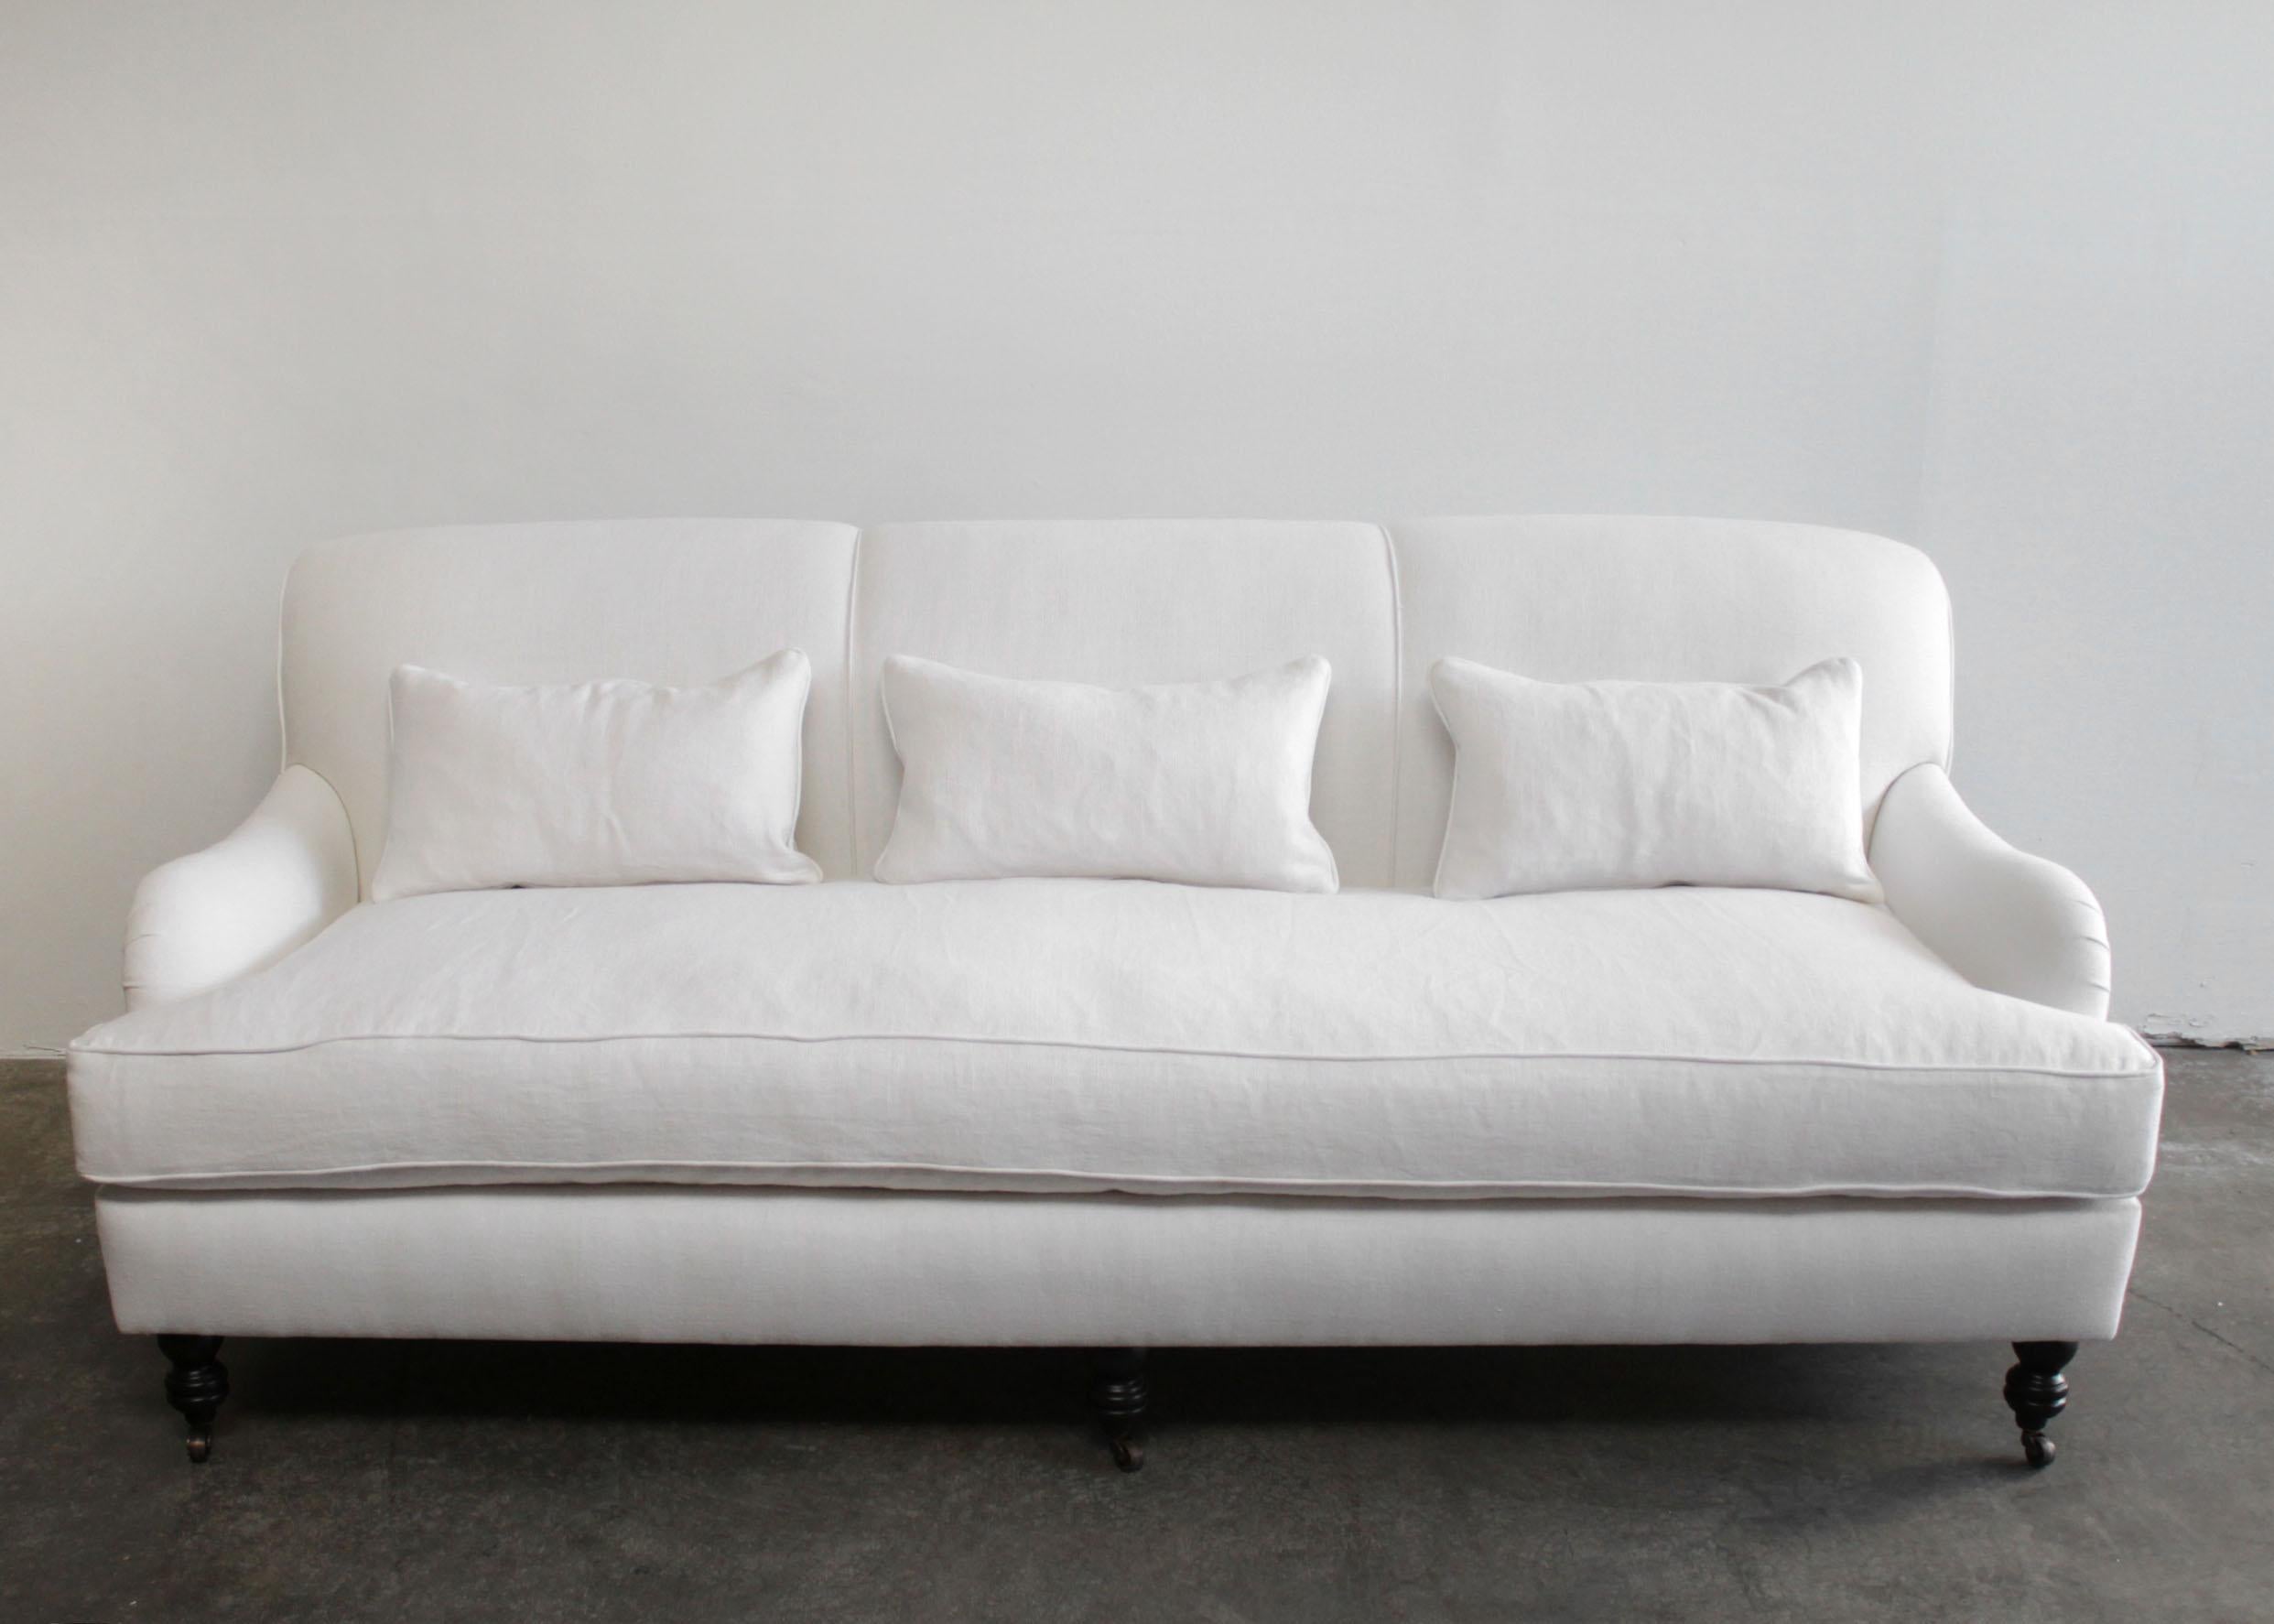 North American Custom LISTING FOR (A) White Linen English Arm Rolled Back Sofa with Casters